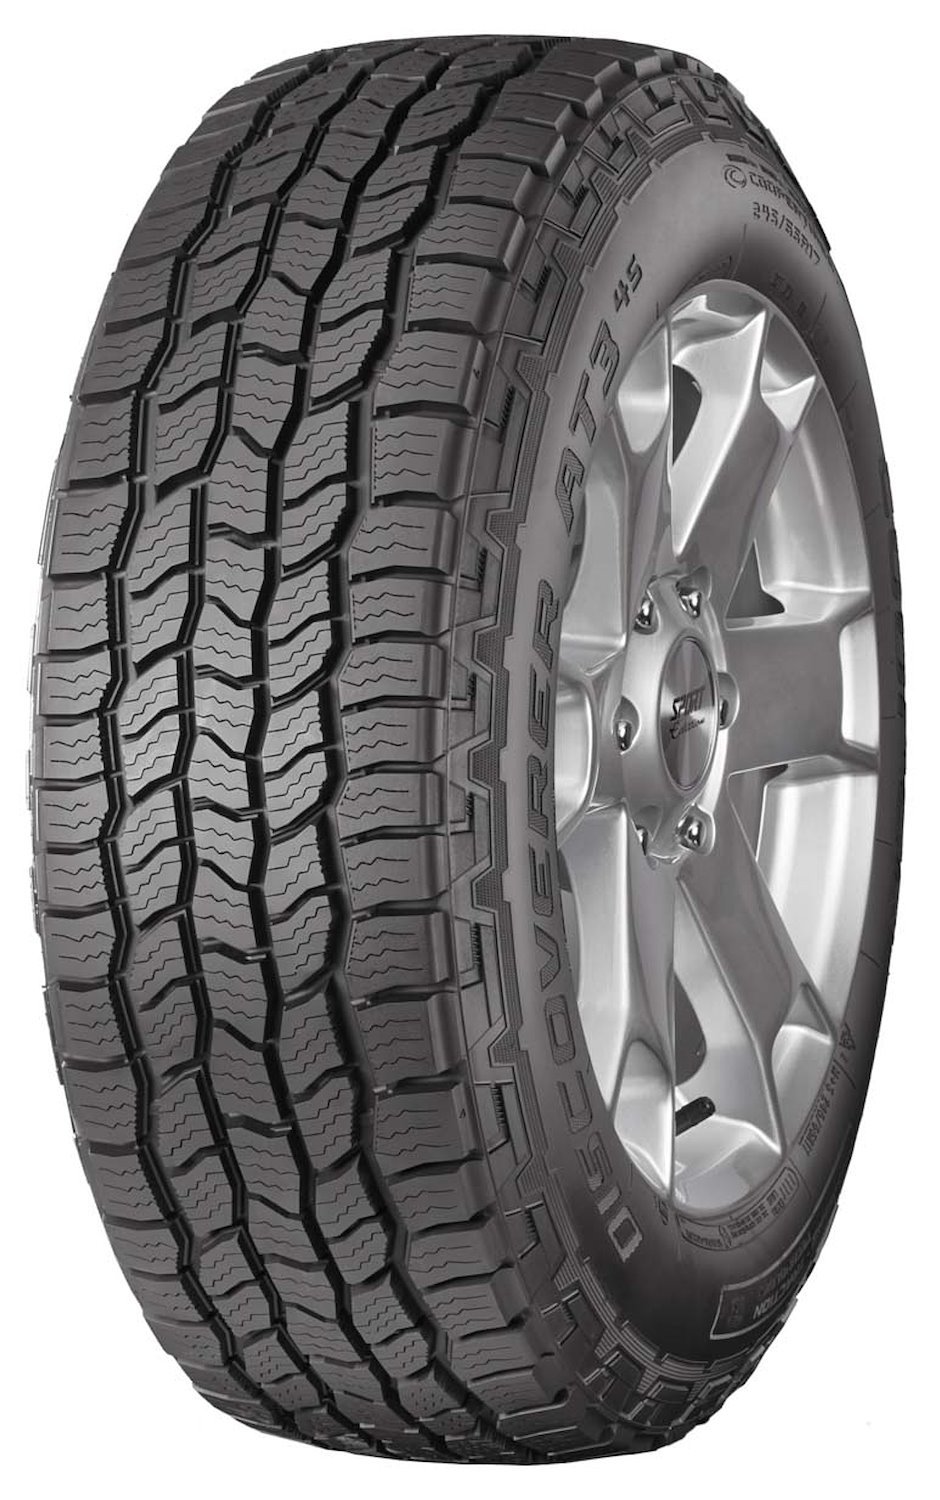 Discoverer AT3 4S All-Terrain Tire, 255/75R17